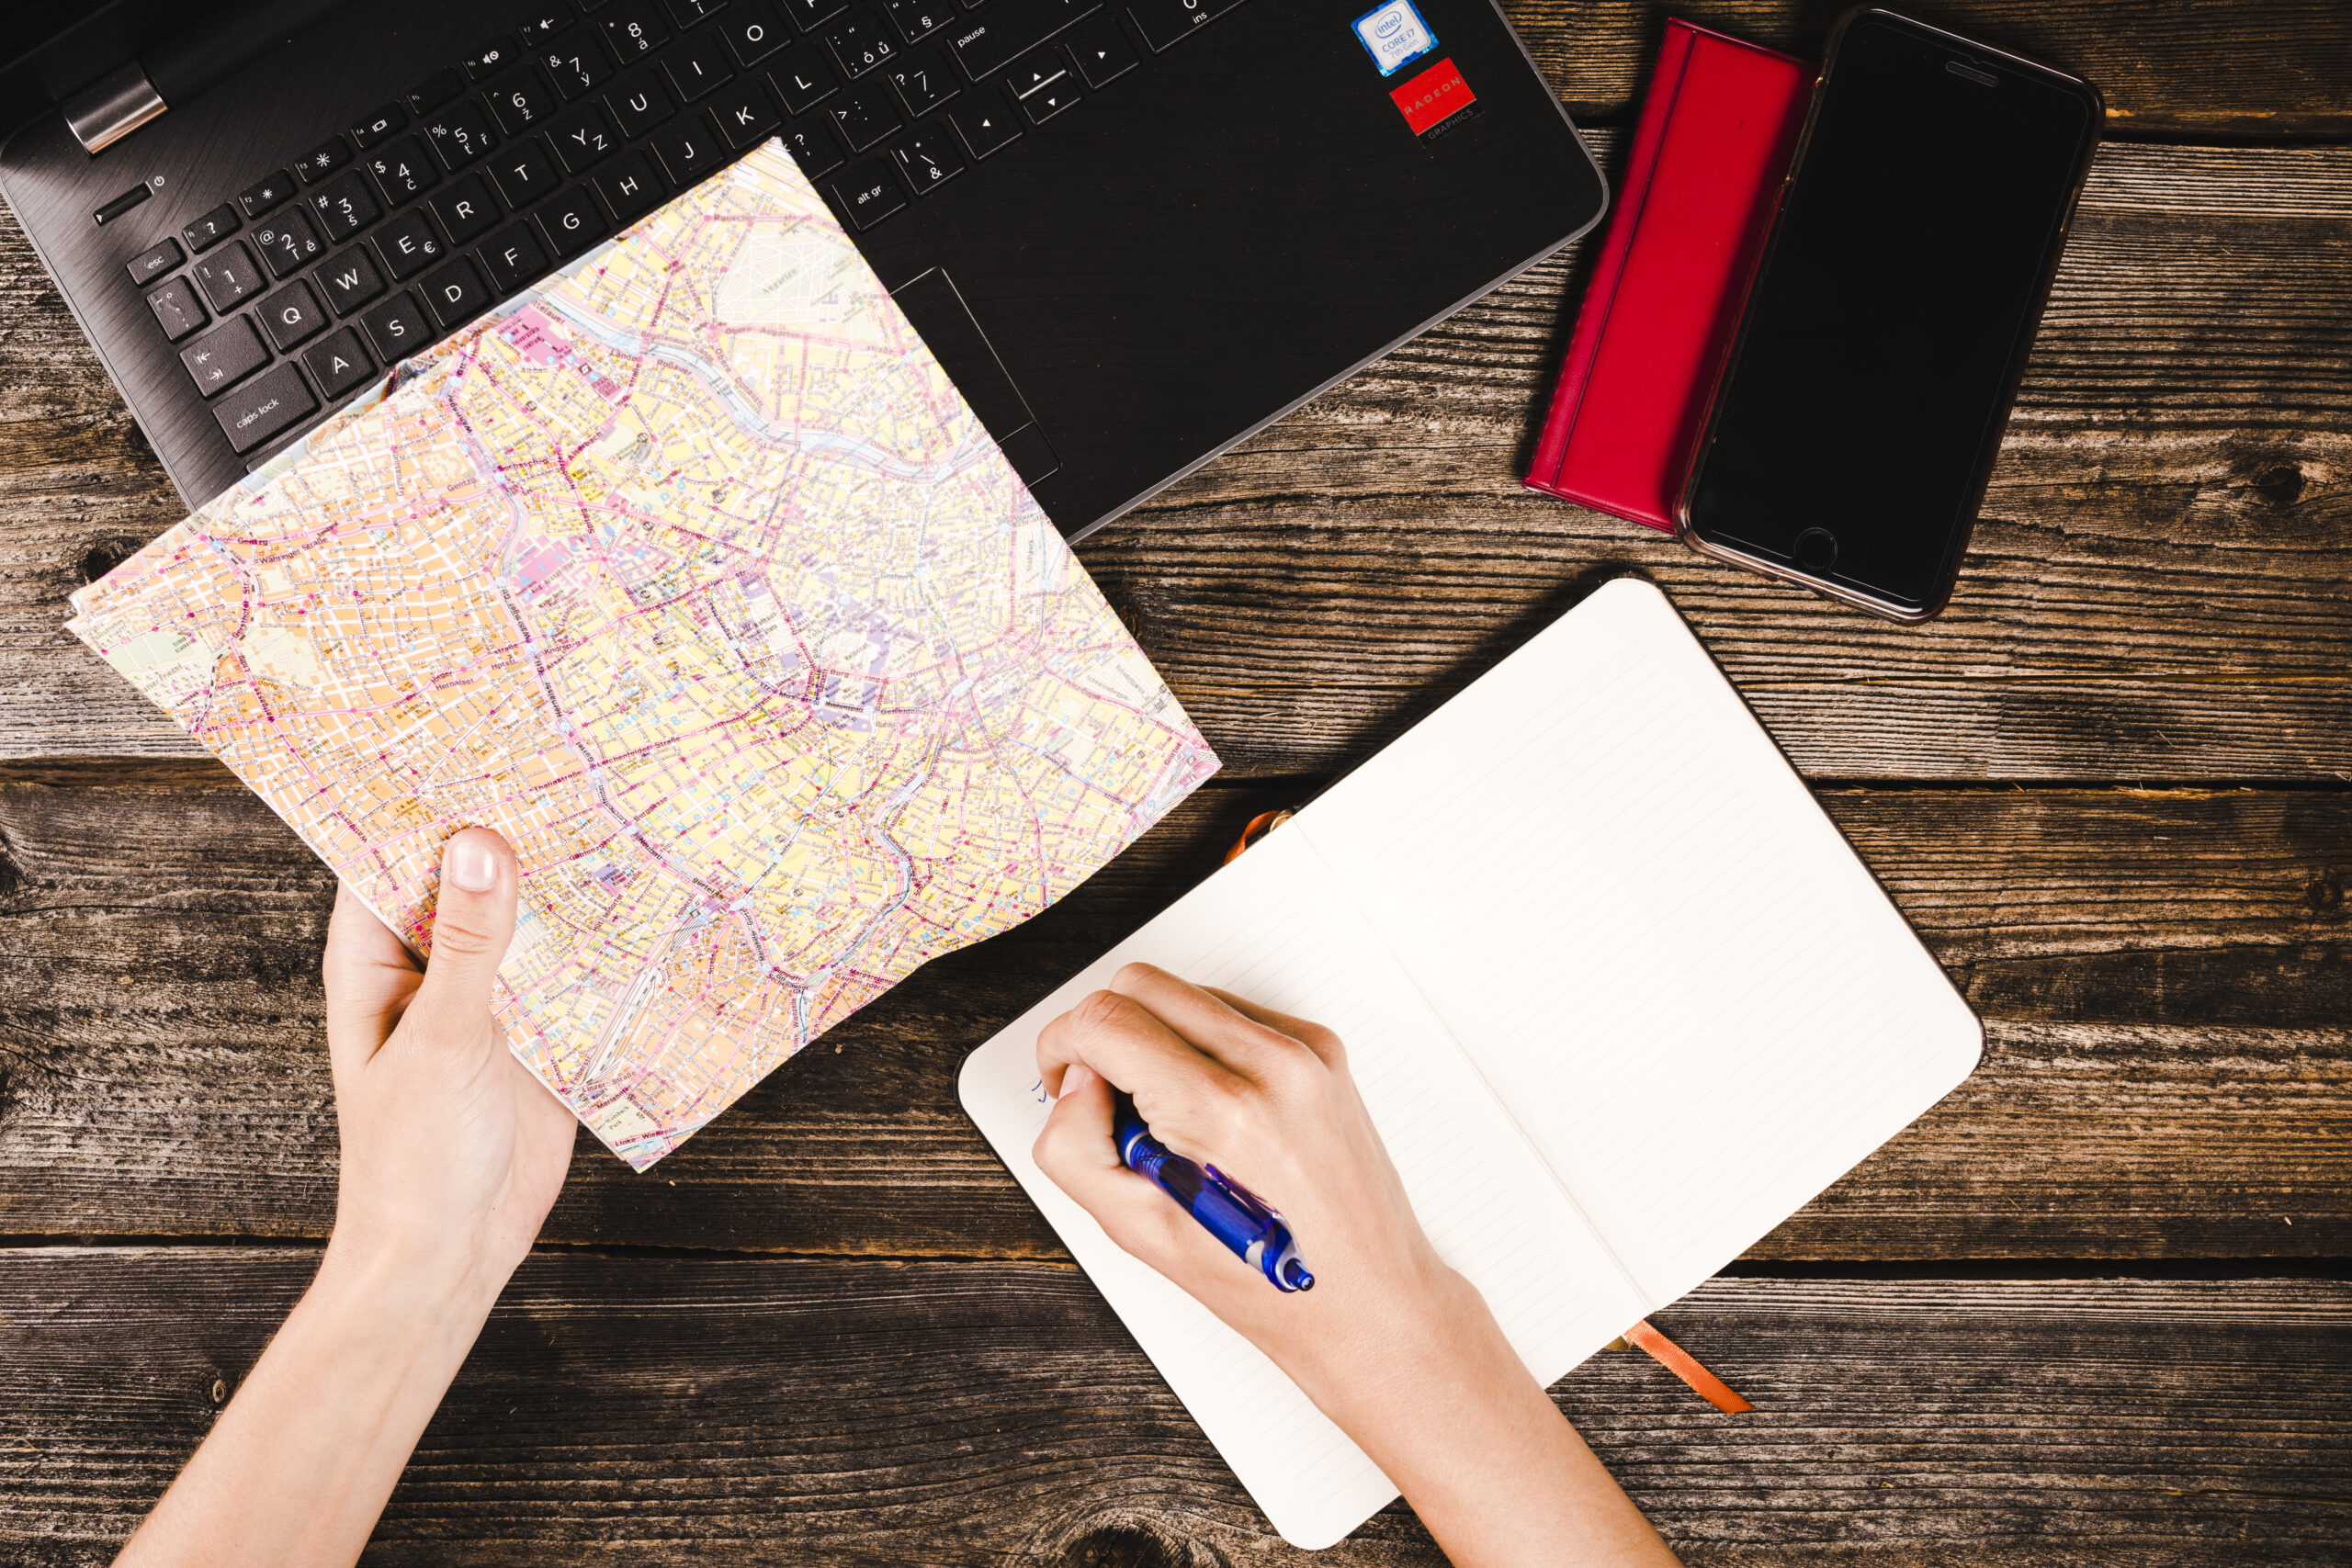 Tips for Planning Your Trip